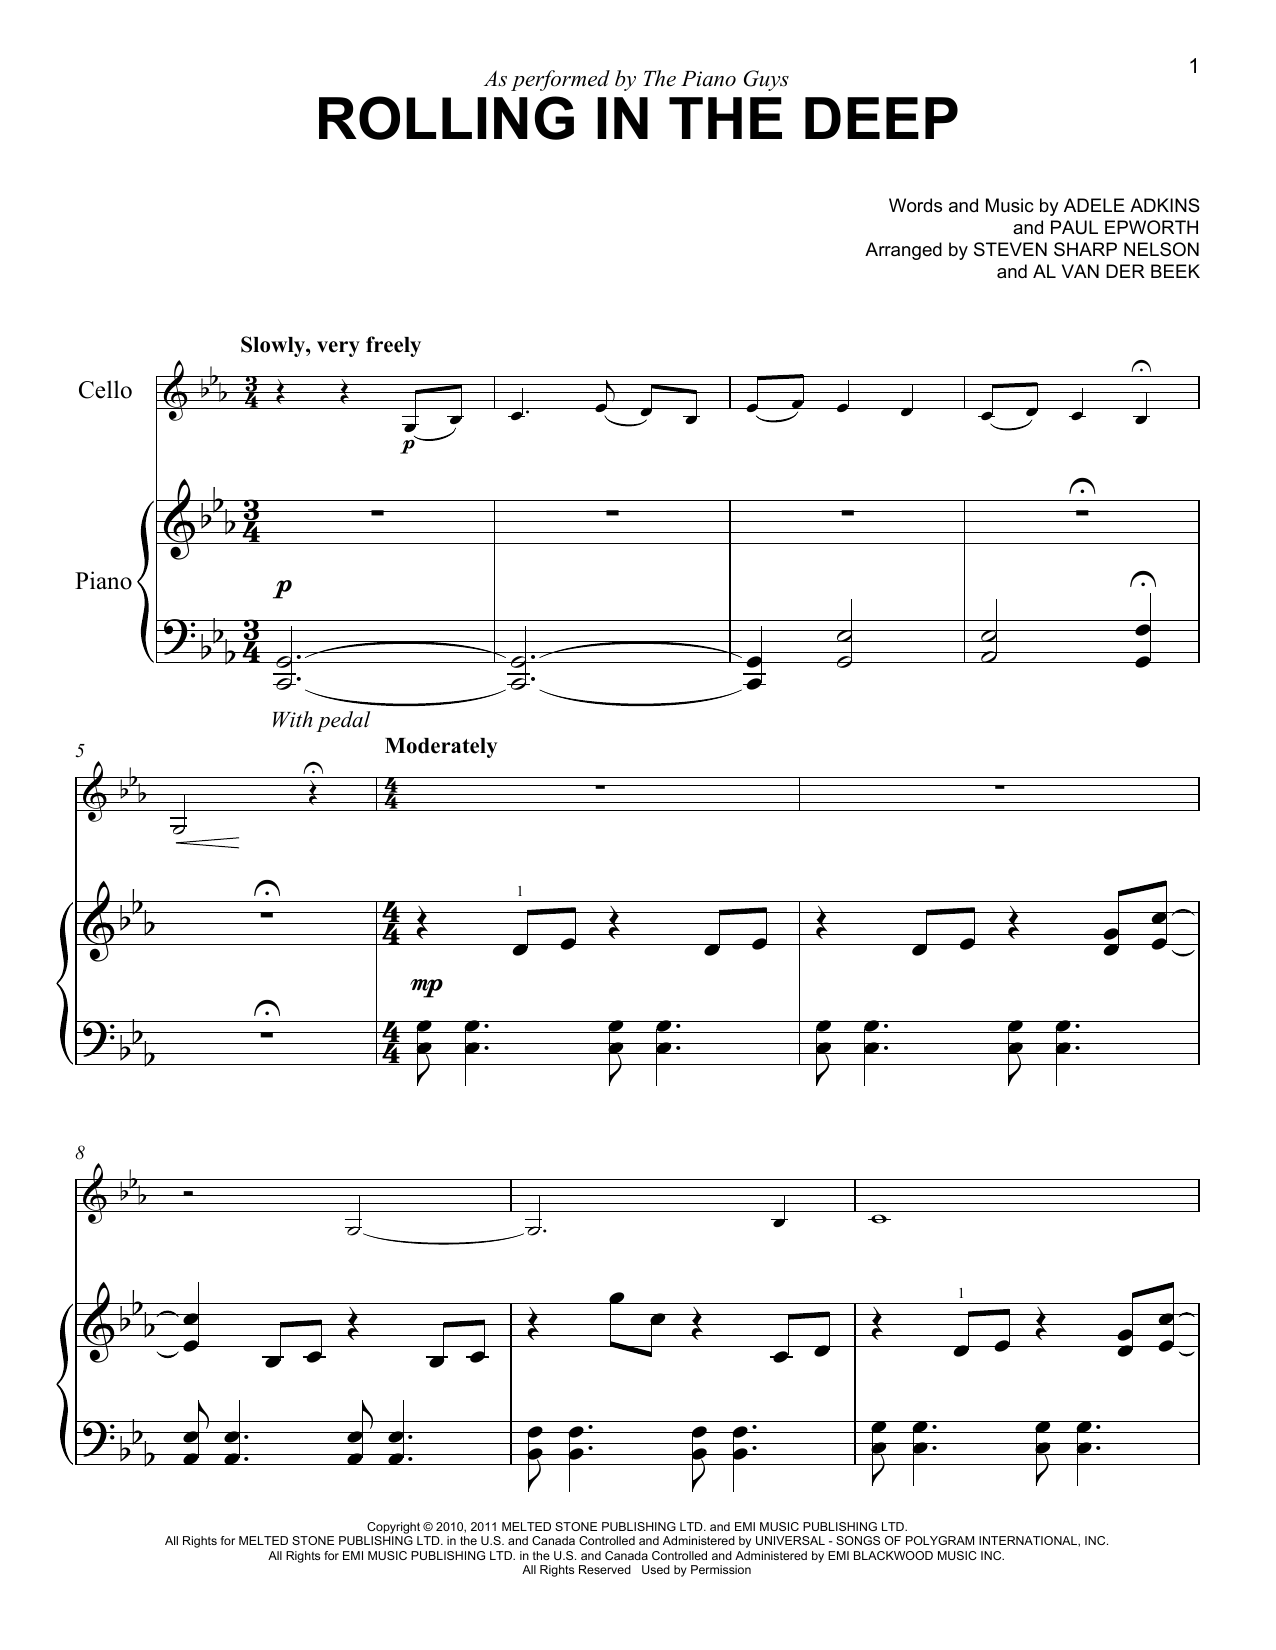 Download The Piano Guys Rolling In The Deep Sheet Music